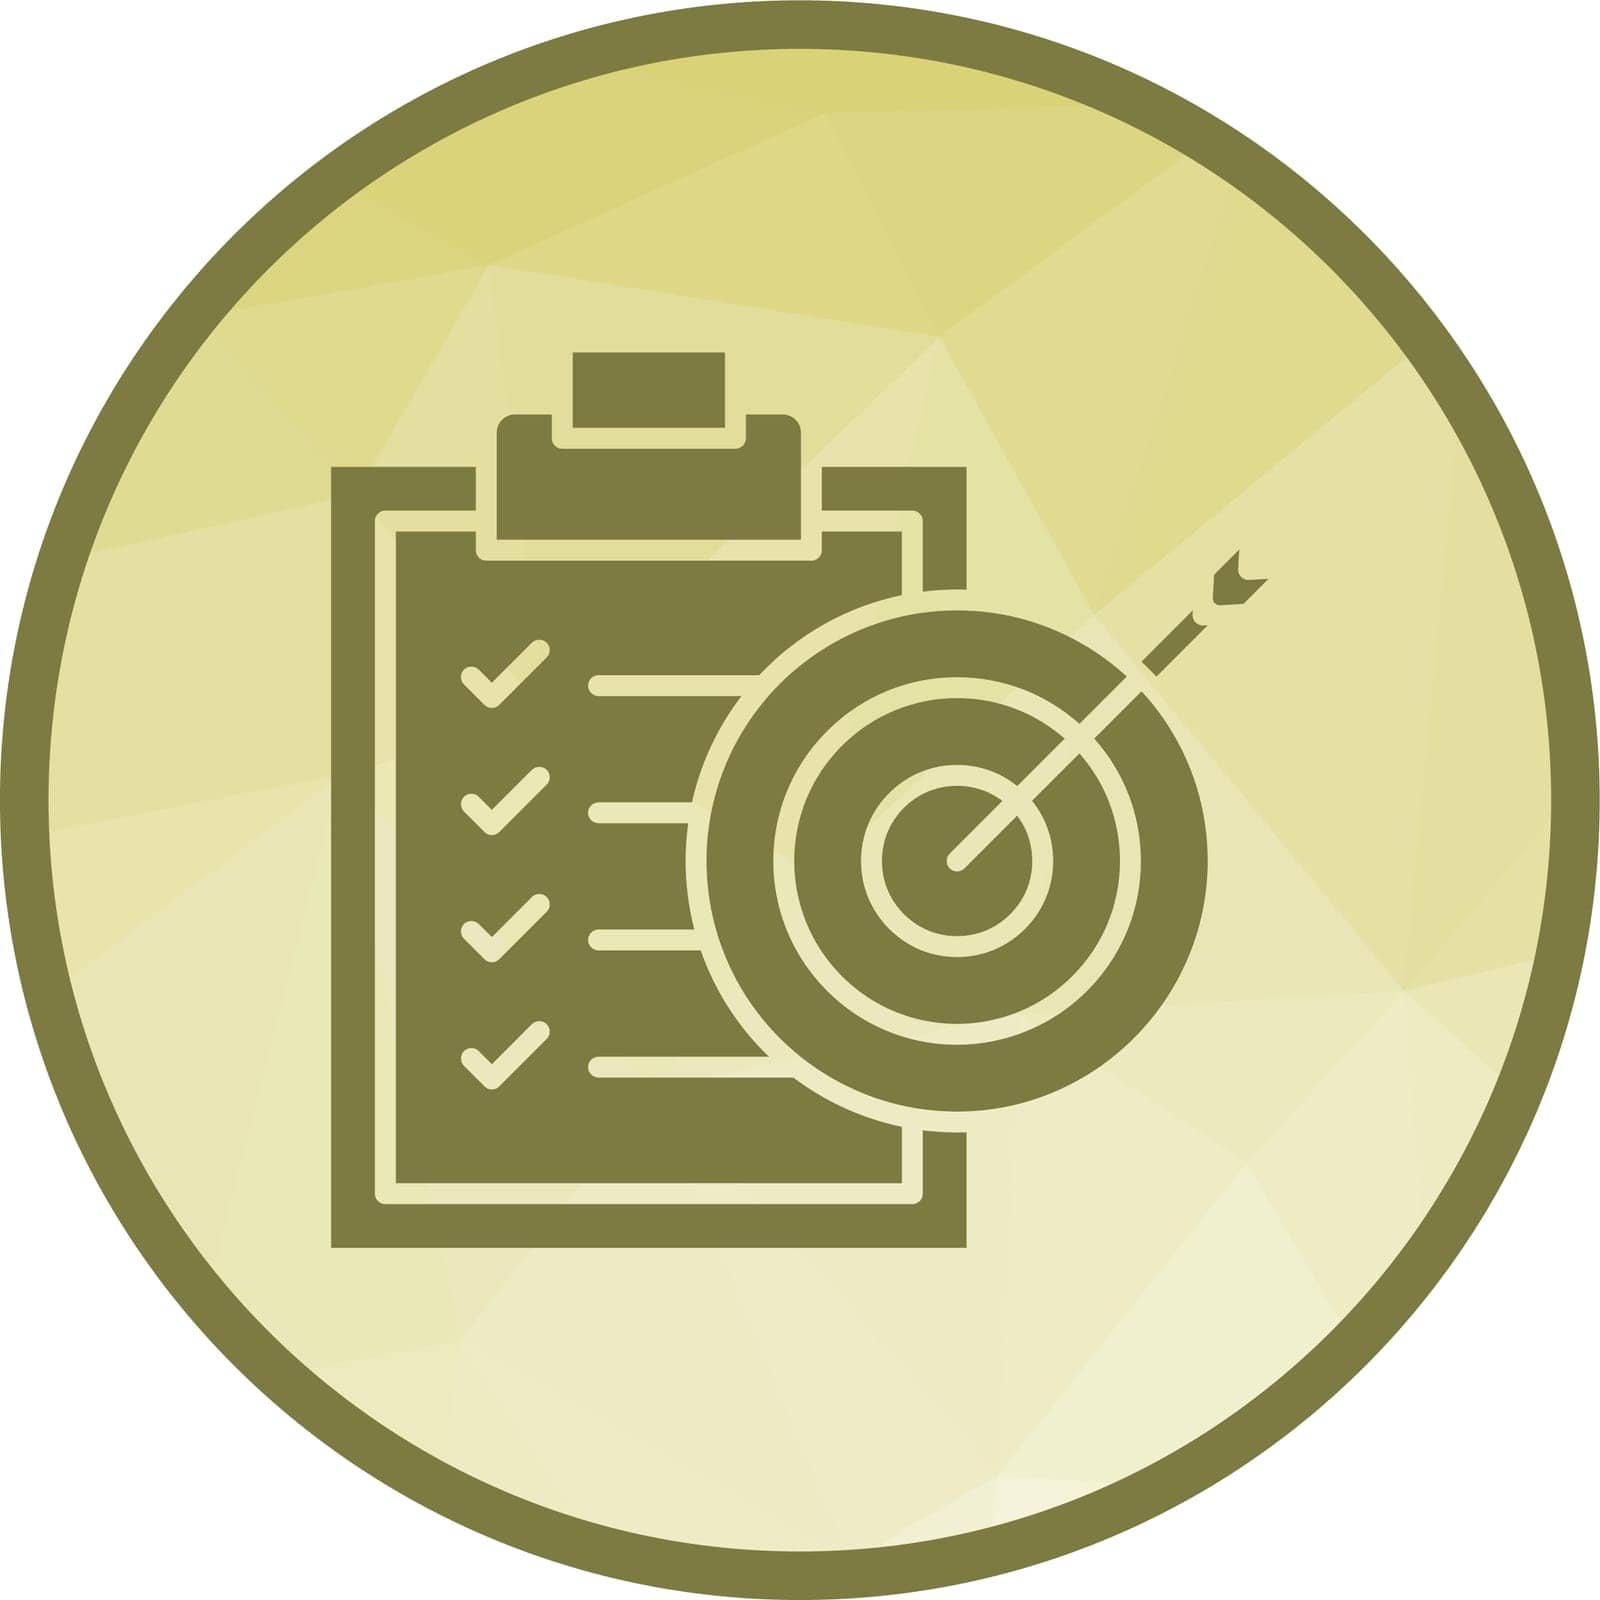 Goal Oriented icon vector image. by ICONBUNNY